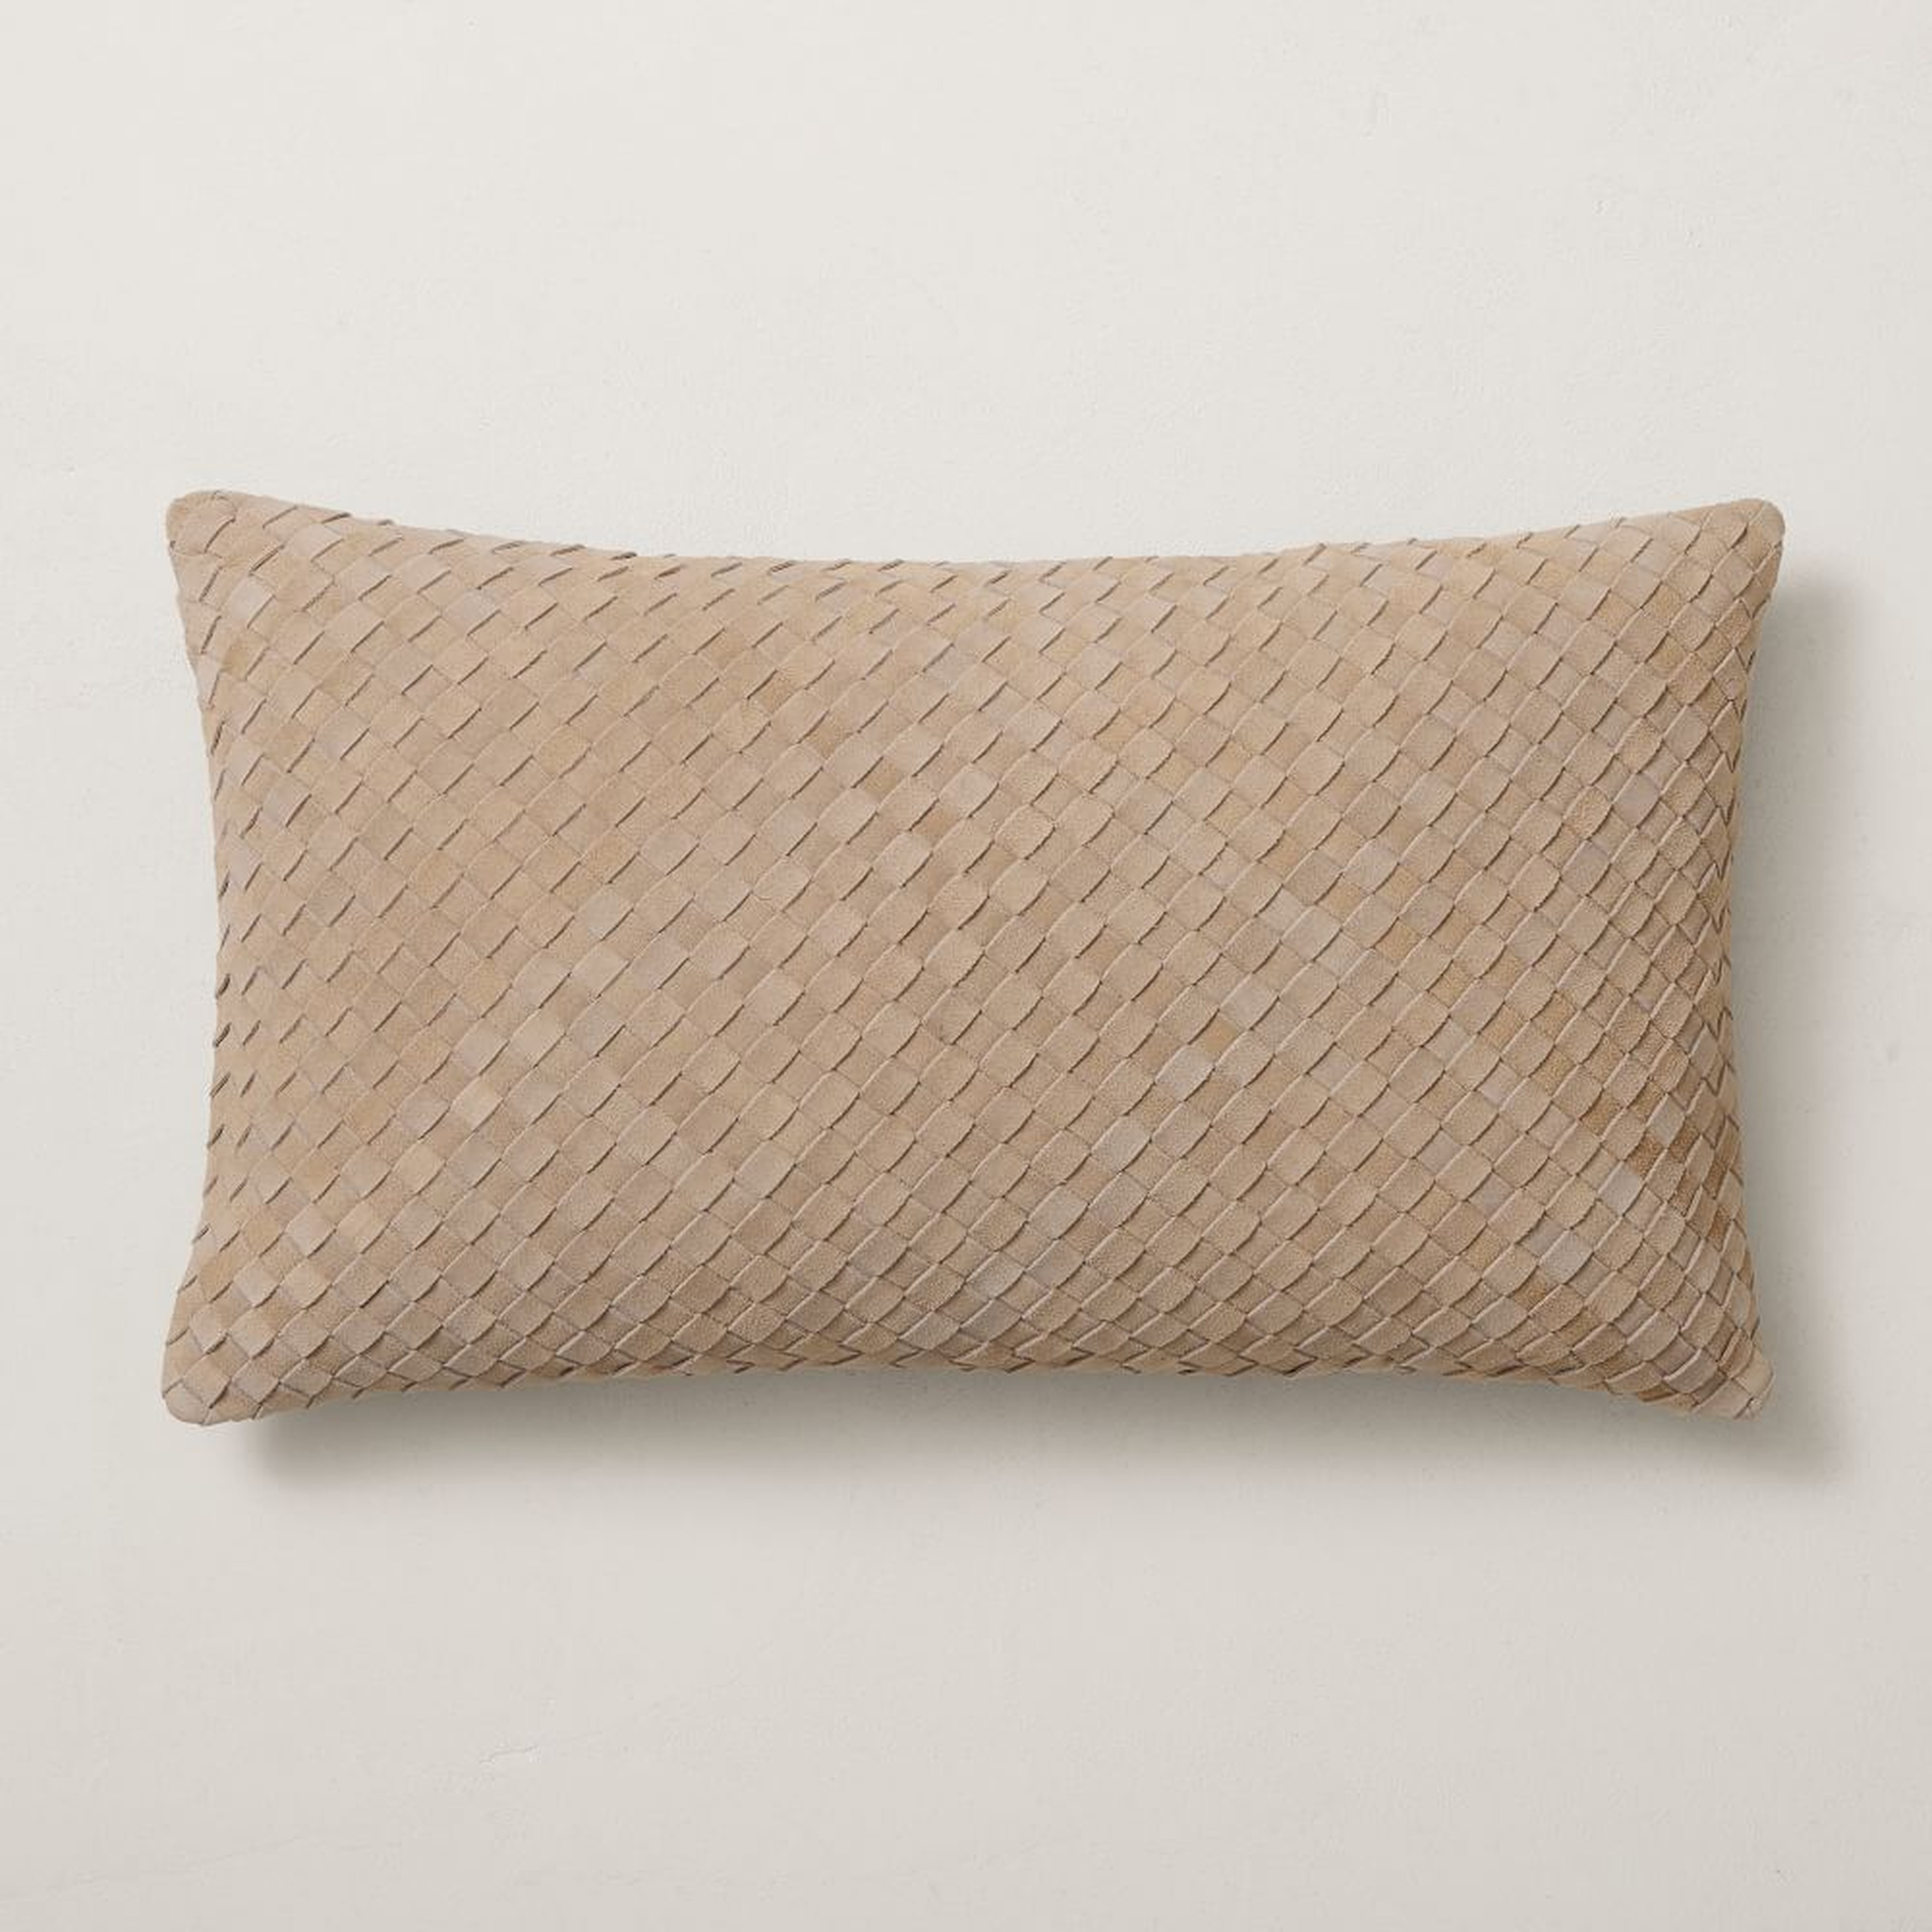 Woven Suede Pillow Cover, 12"x21", Sable - West Elm